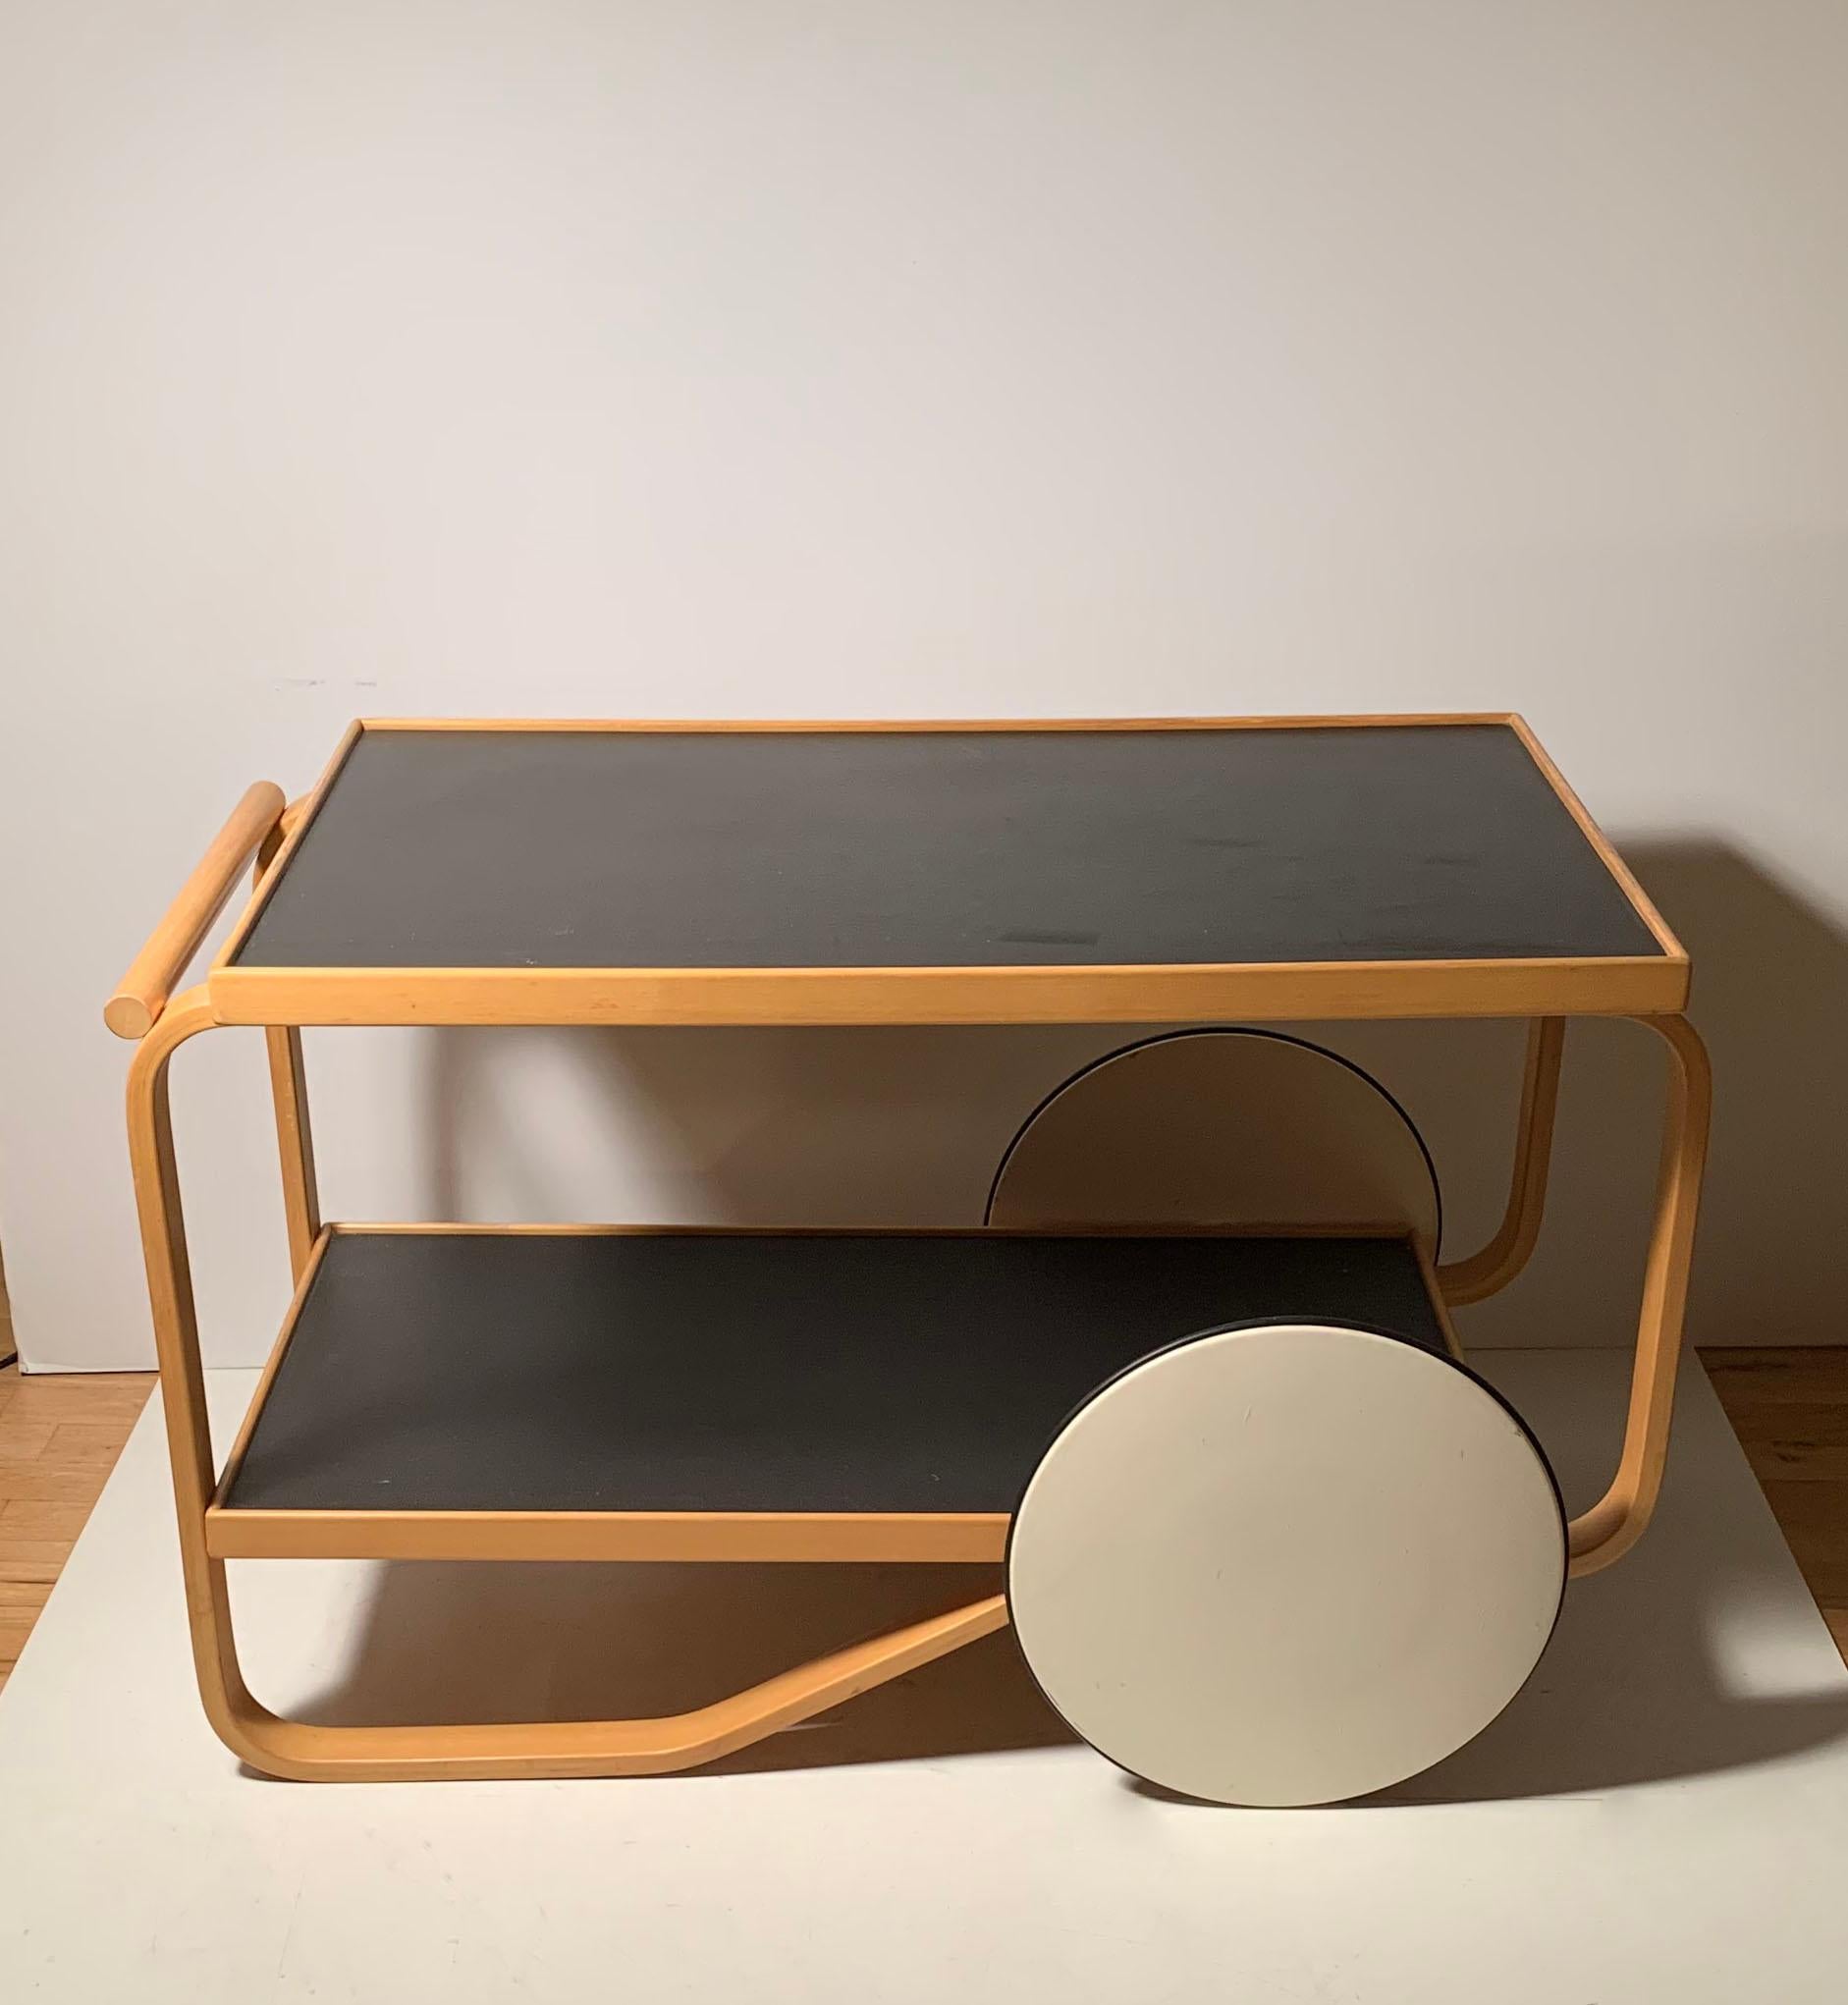 Authentic tea trolley 901 in birch by Alvar Aalto for Artek. Signed on underside. This example I would estimate from the 1980s-1990s.
In very nice vintage condition. Some minor vintage wear. Otherwise beautiful.